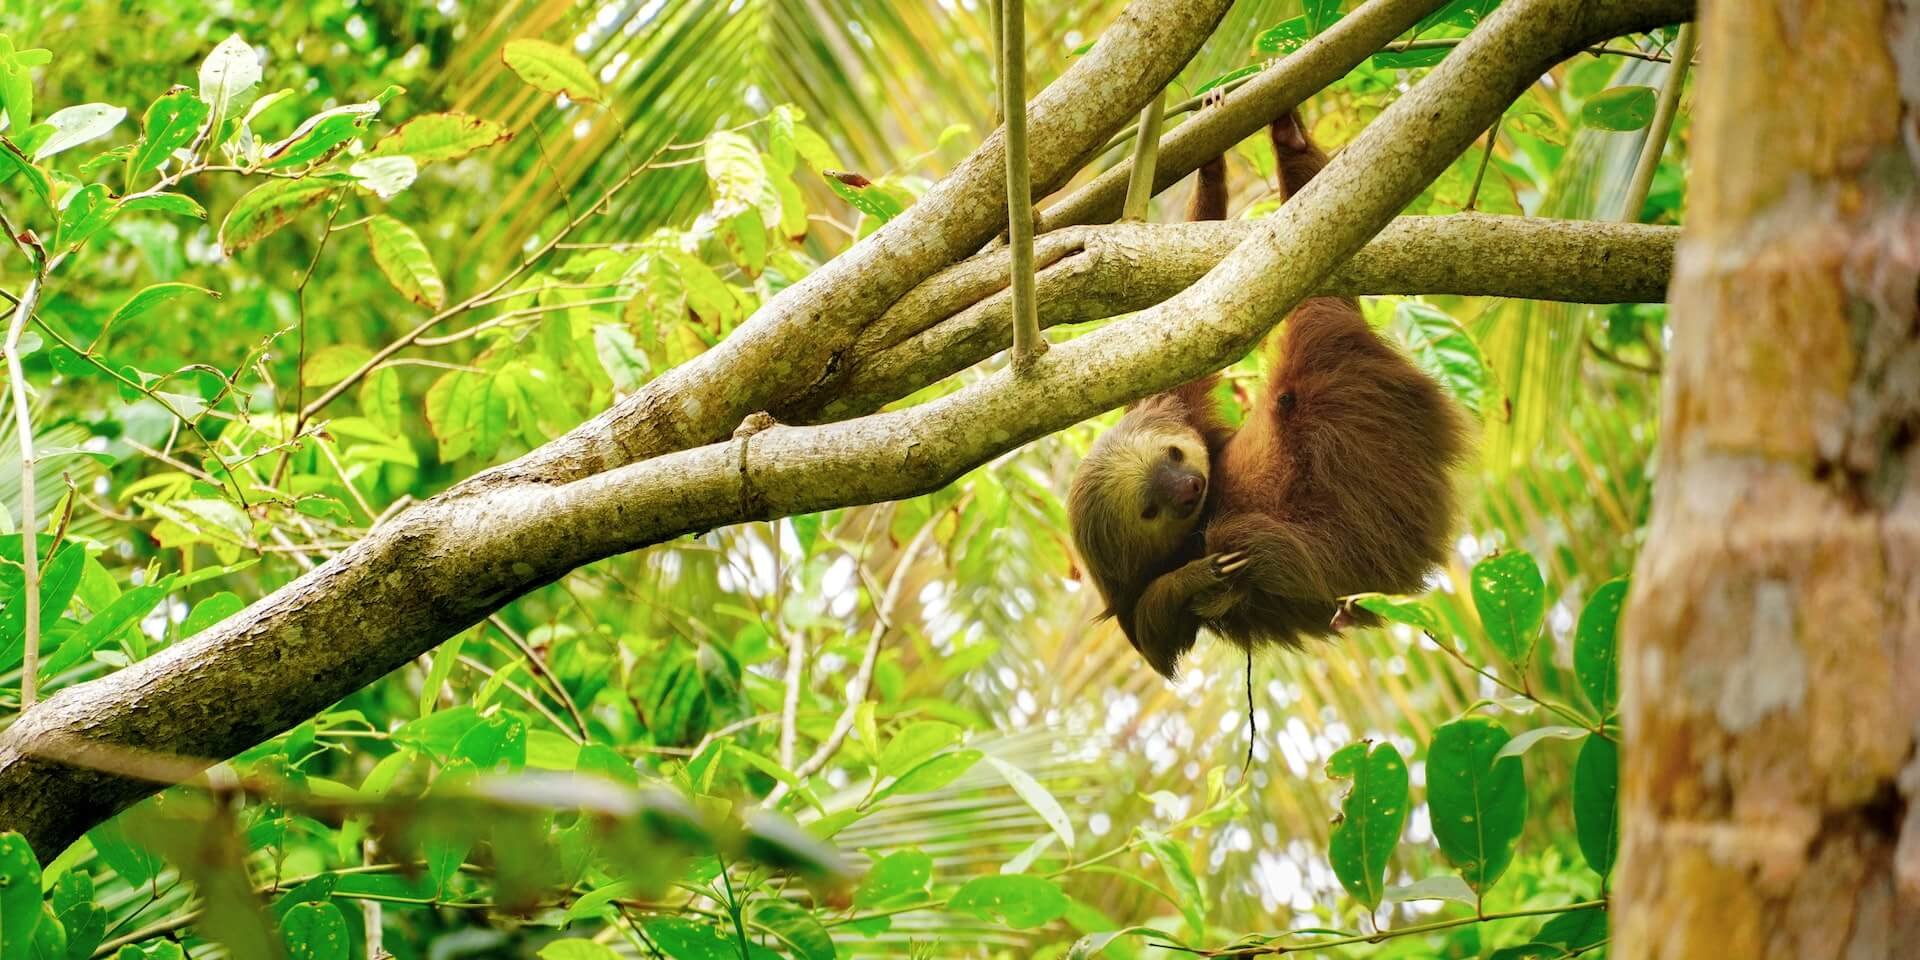 Sloth hanging in tree